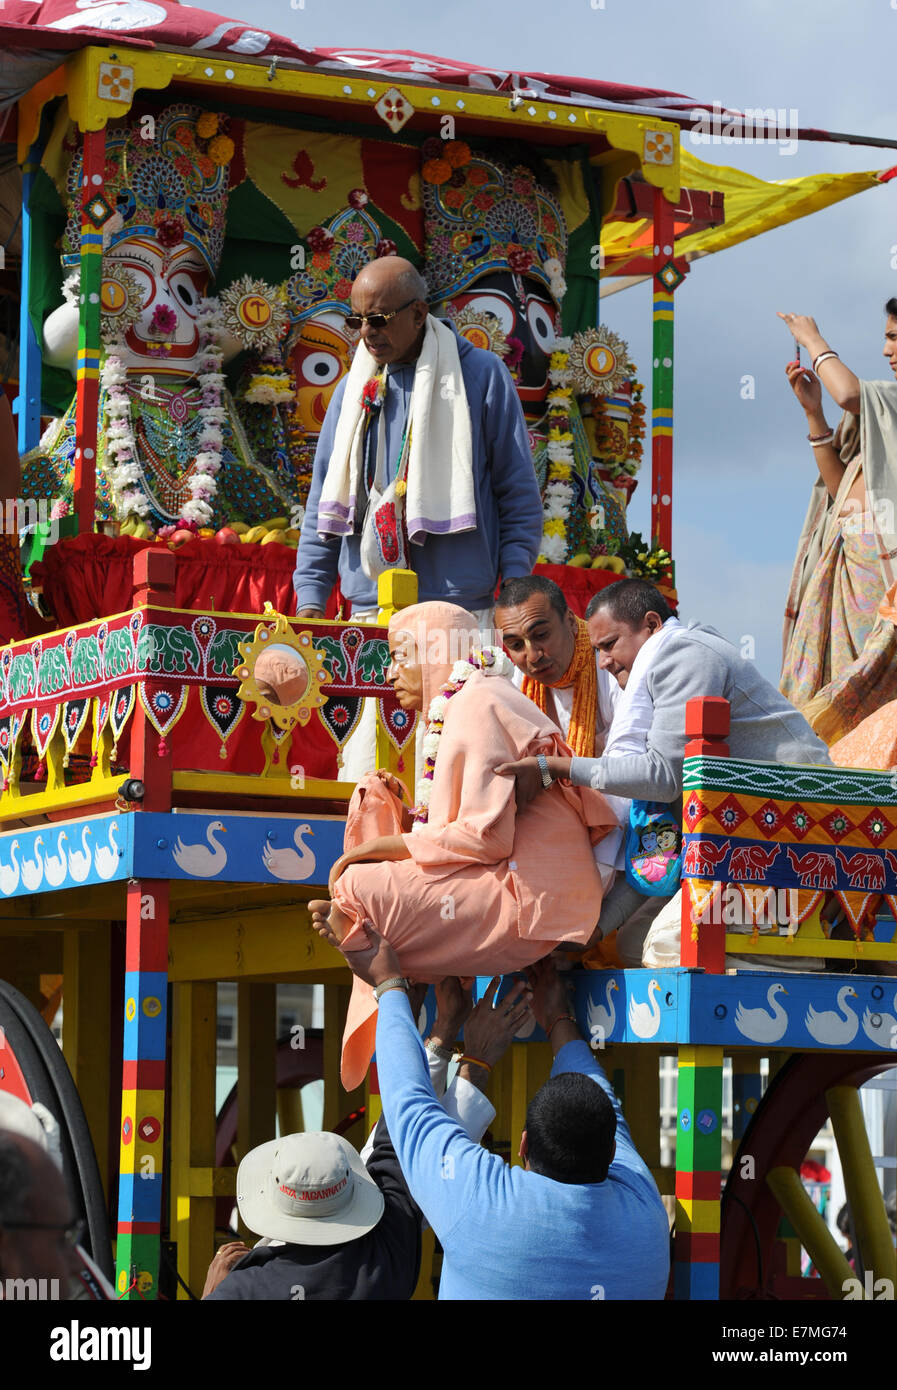 Hove, Brighton, Sussex, UK. 21st September 2014.  Hundreds of Hare Krishna followers take part in the annual  Rathayatra Festival Chariot Parade along Hove seafront Rathayatra is a festival for Lord Krishna and His devotees.  Its an extraordinary spiritual event that originates in Jagannatha Puri on the east coast of India and dates back over 2,000 years. Everyone chants the Hare Krishna maha-mantra  and dances in ecstacy as Krishna in his form of Jagannatha is pulled along on a huge wooden cart to the Peace Statue on Hove seafront and back again  Credit:  Simon Dack/Alamy Live News Stock Photo